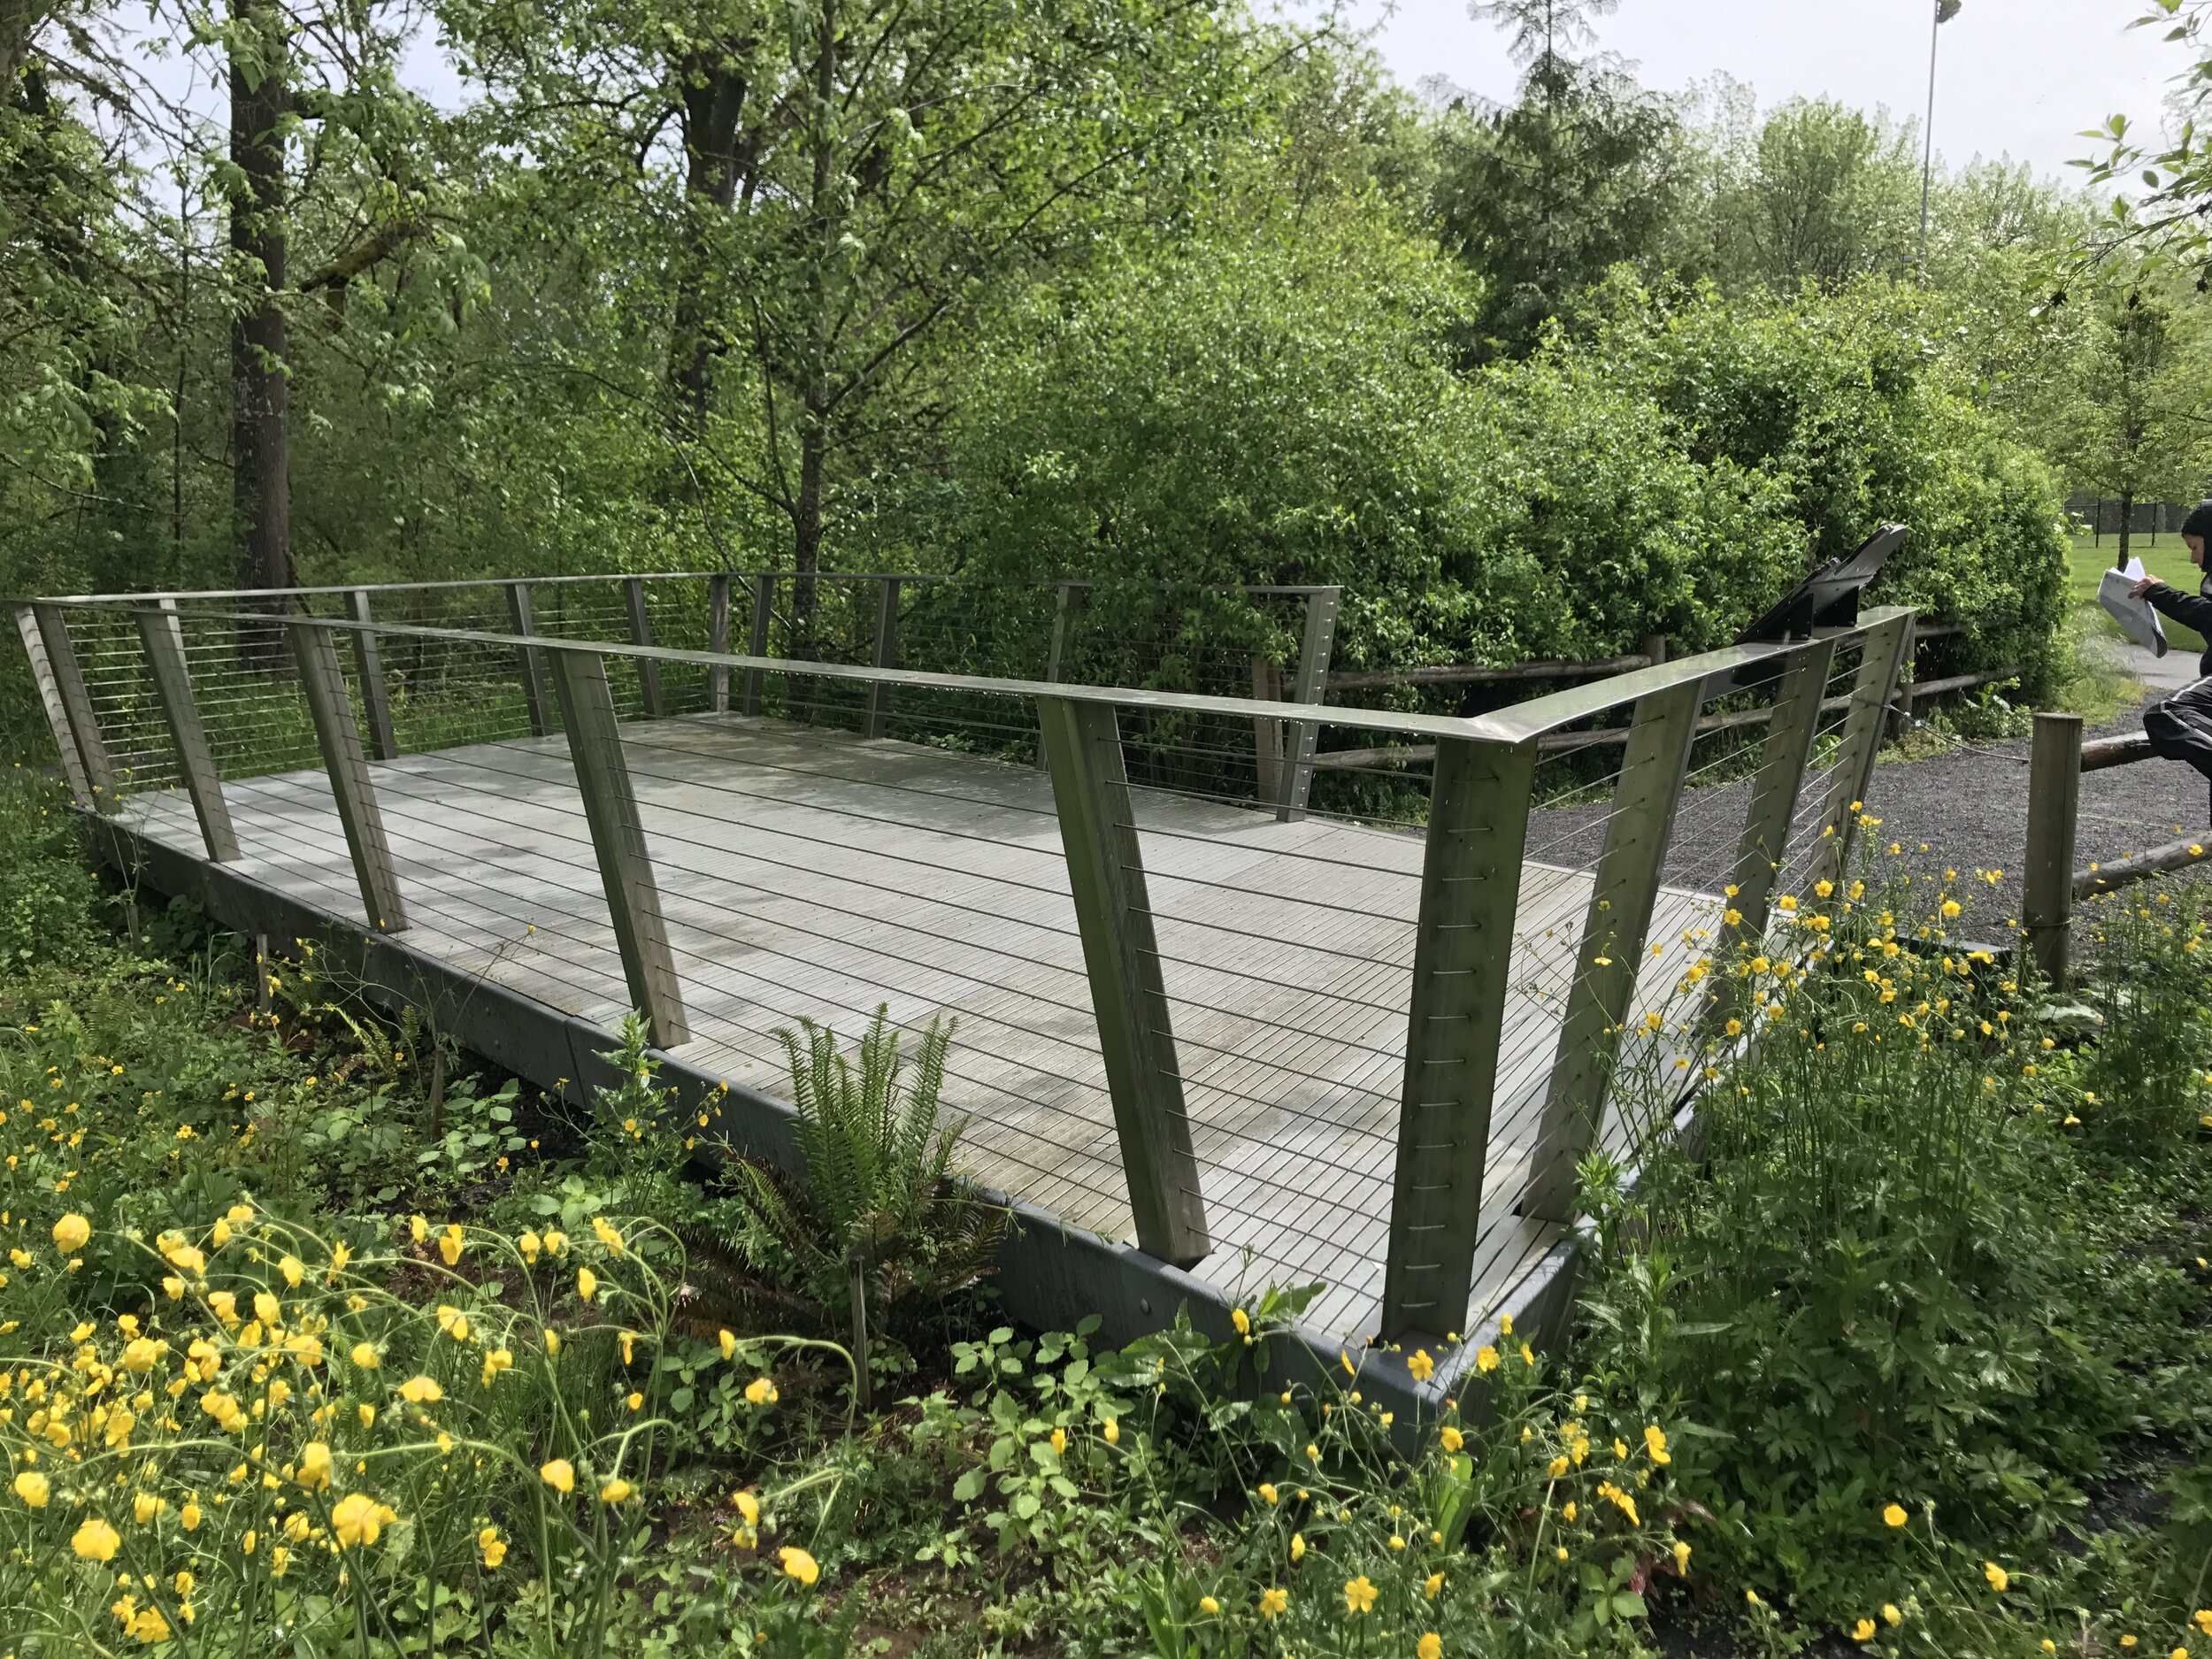 angled railing at viewpoint overlook, blooming flowers surrounding 